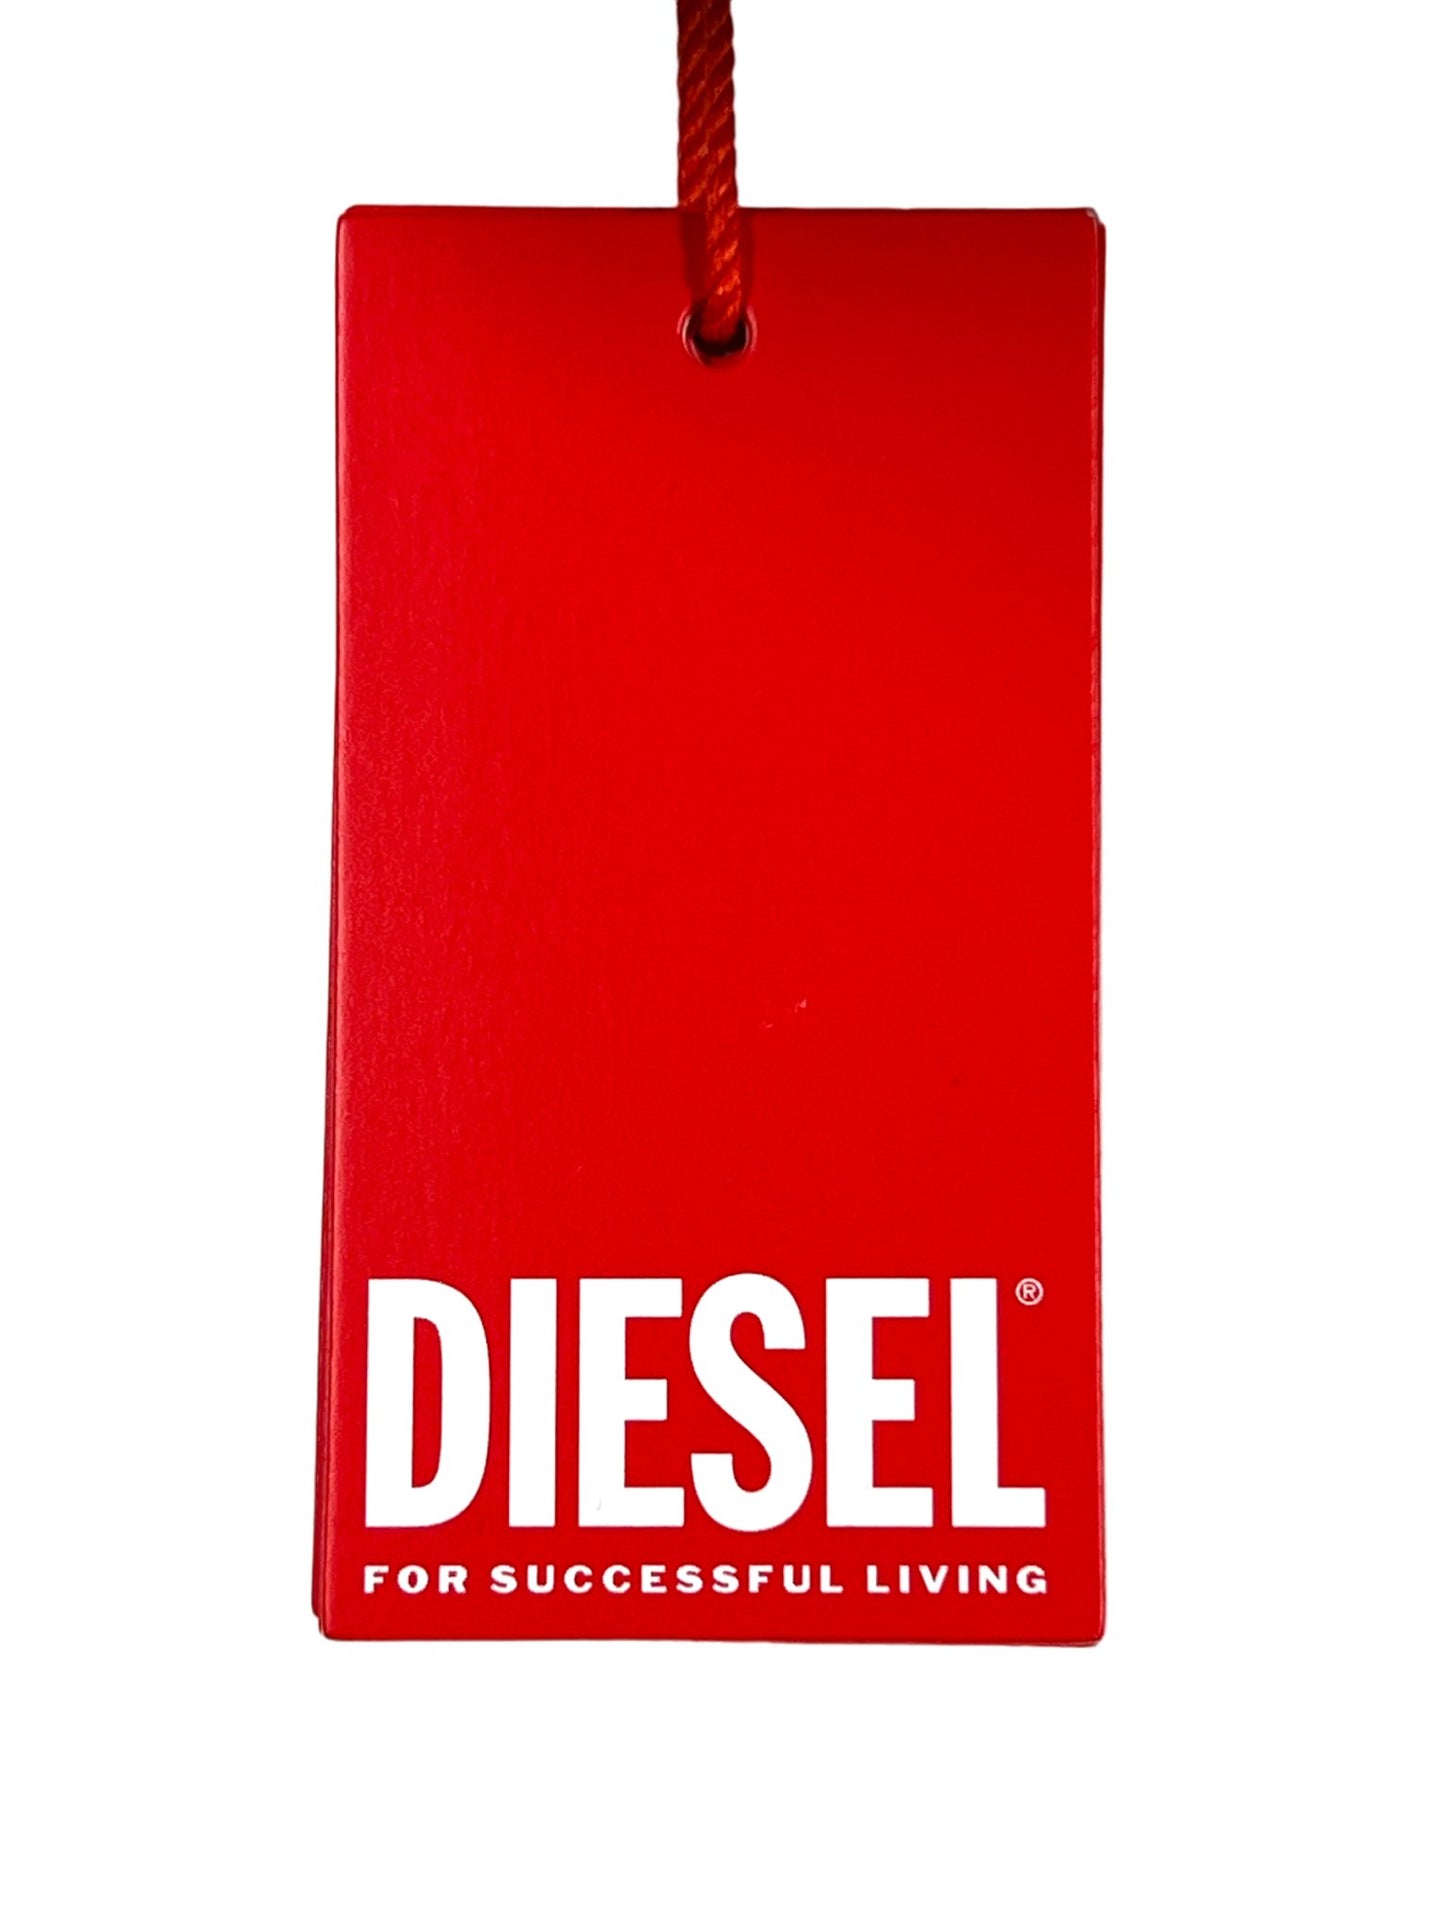 Grey DIESEL T-WASH-N t-shirt brand tag with the slogan “for successful living” on a white background.